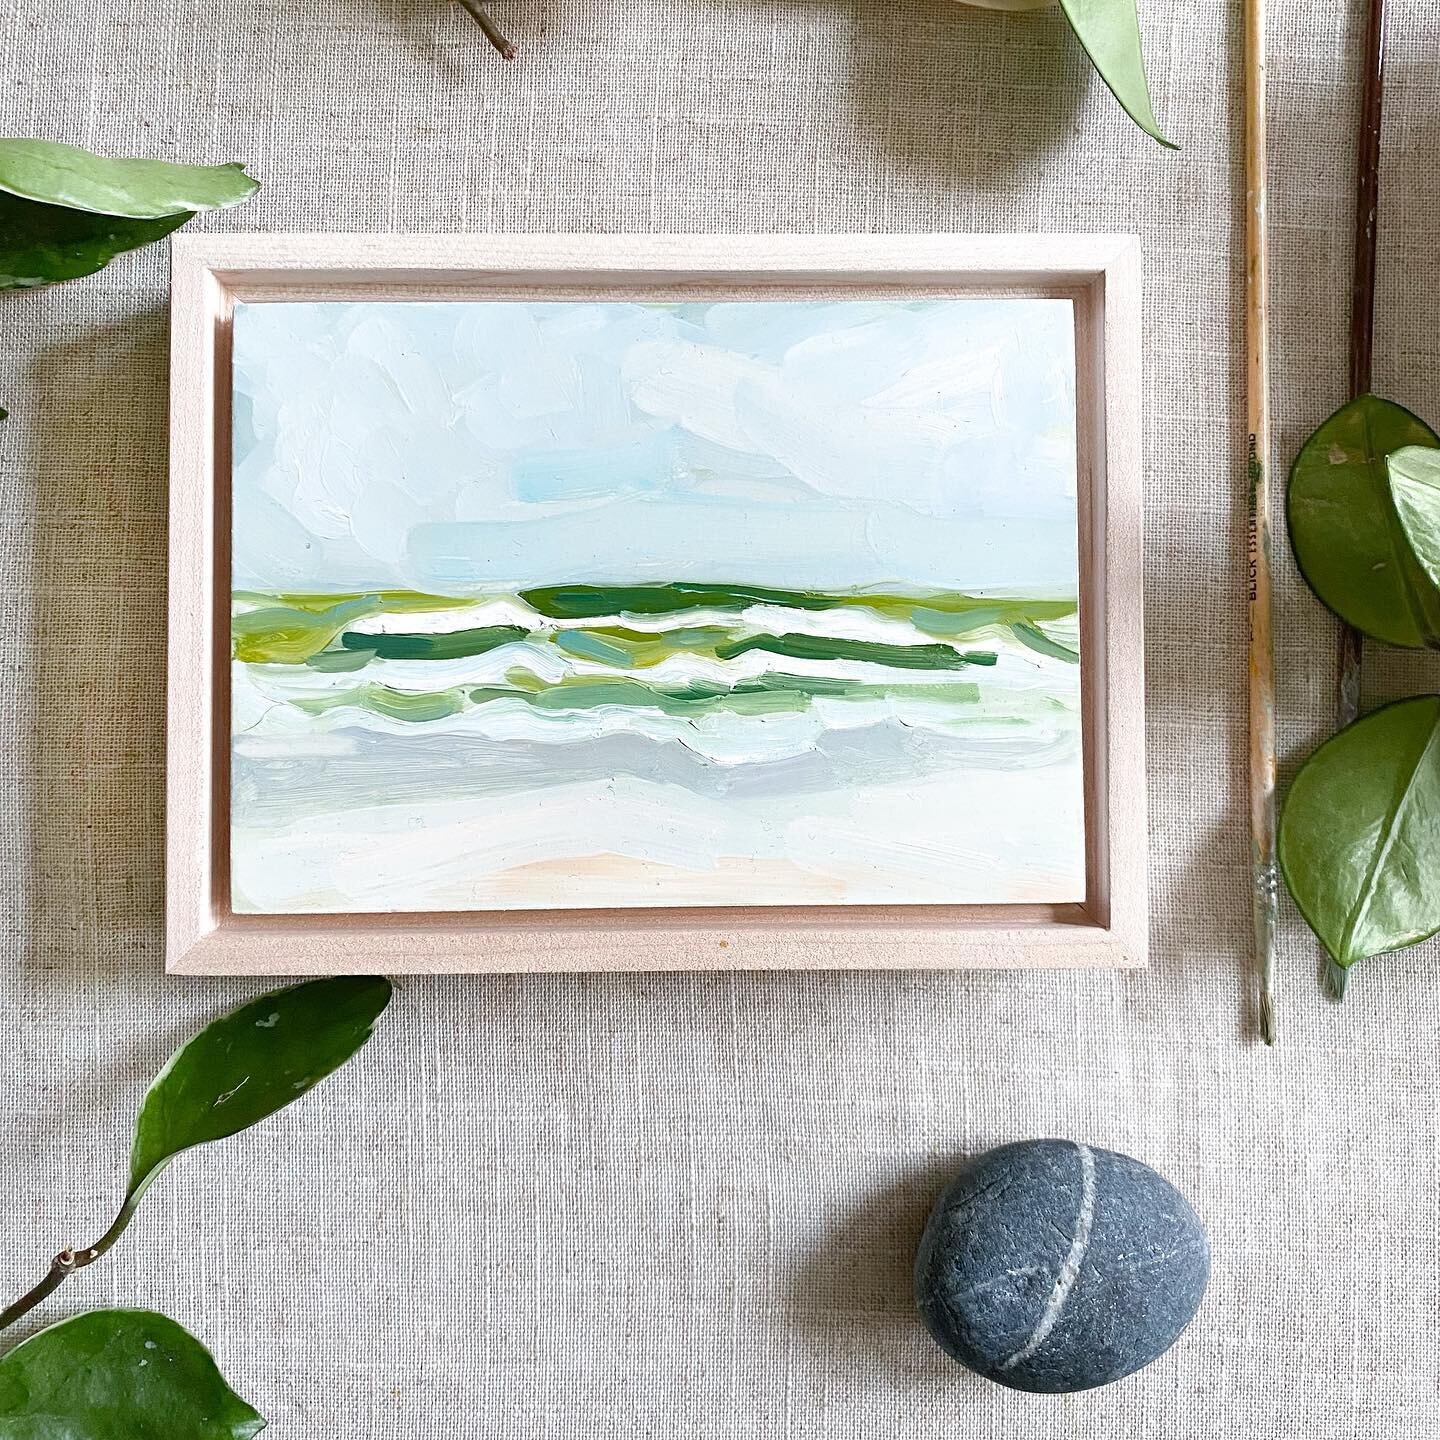 🌊 In two days, the Crescent Beach Collection will be available to you!! 🌊
.
If you&rsquo;ve had the pleasure of walking the beach in October, you&rsquo;ll know exactly what my painting day was like - crisp air in your lungs, whipping wind leaving y